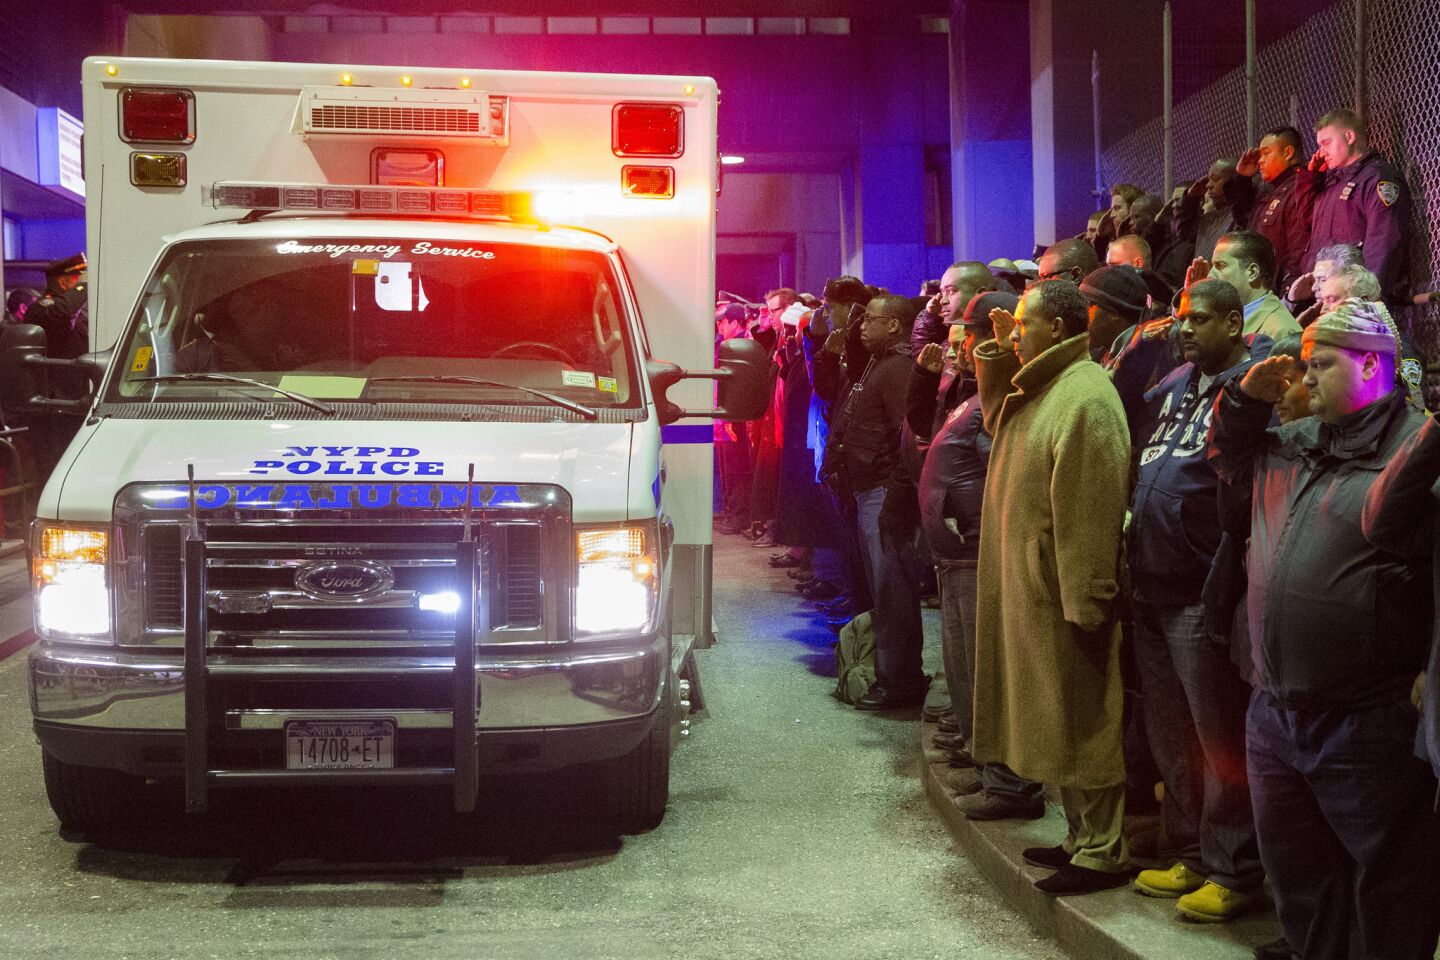 Mourners stand at attention as the bodies of Officers Rafael Ramos and Wenjian Liu are carried off in an ambulance.